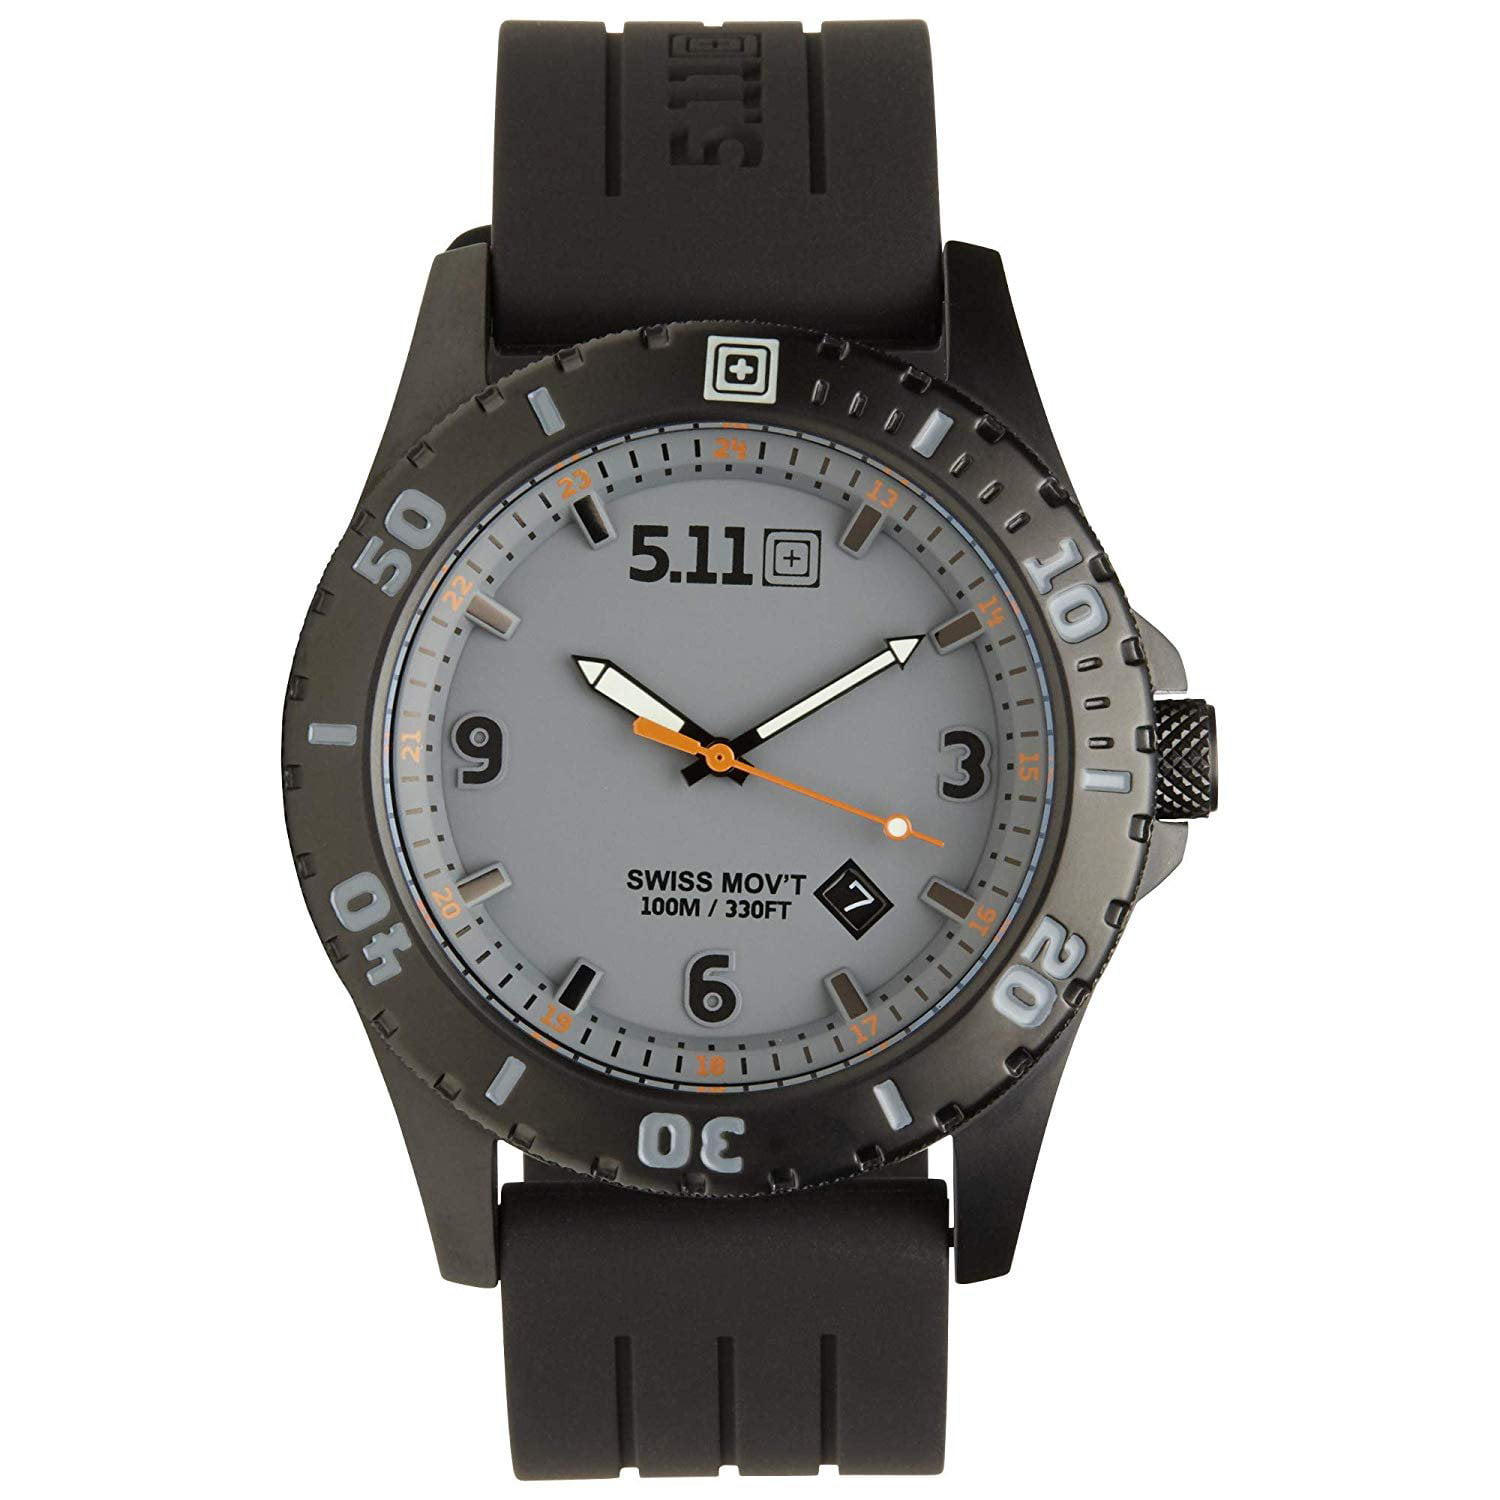 Affordable 5 11 Tactical Series Watch For Sale Adverts Nigeria Photos